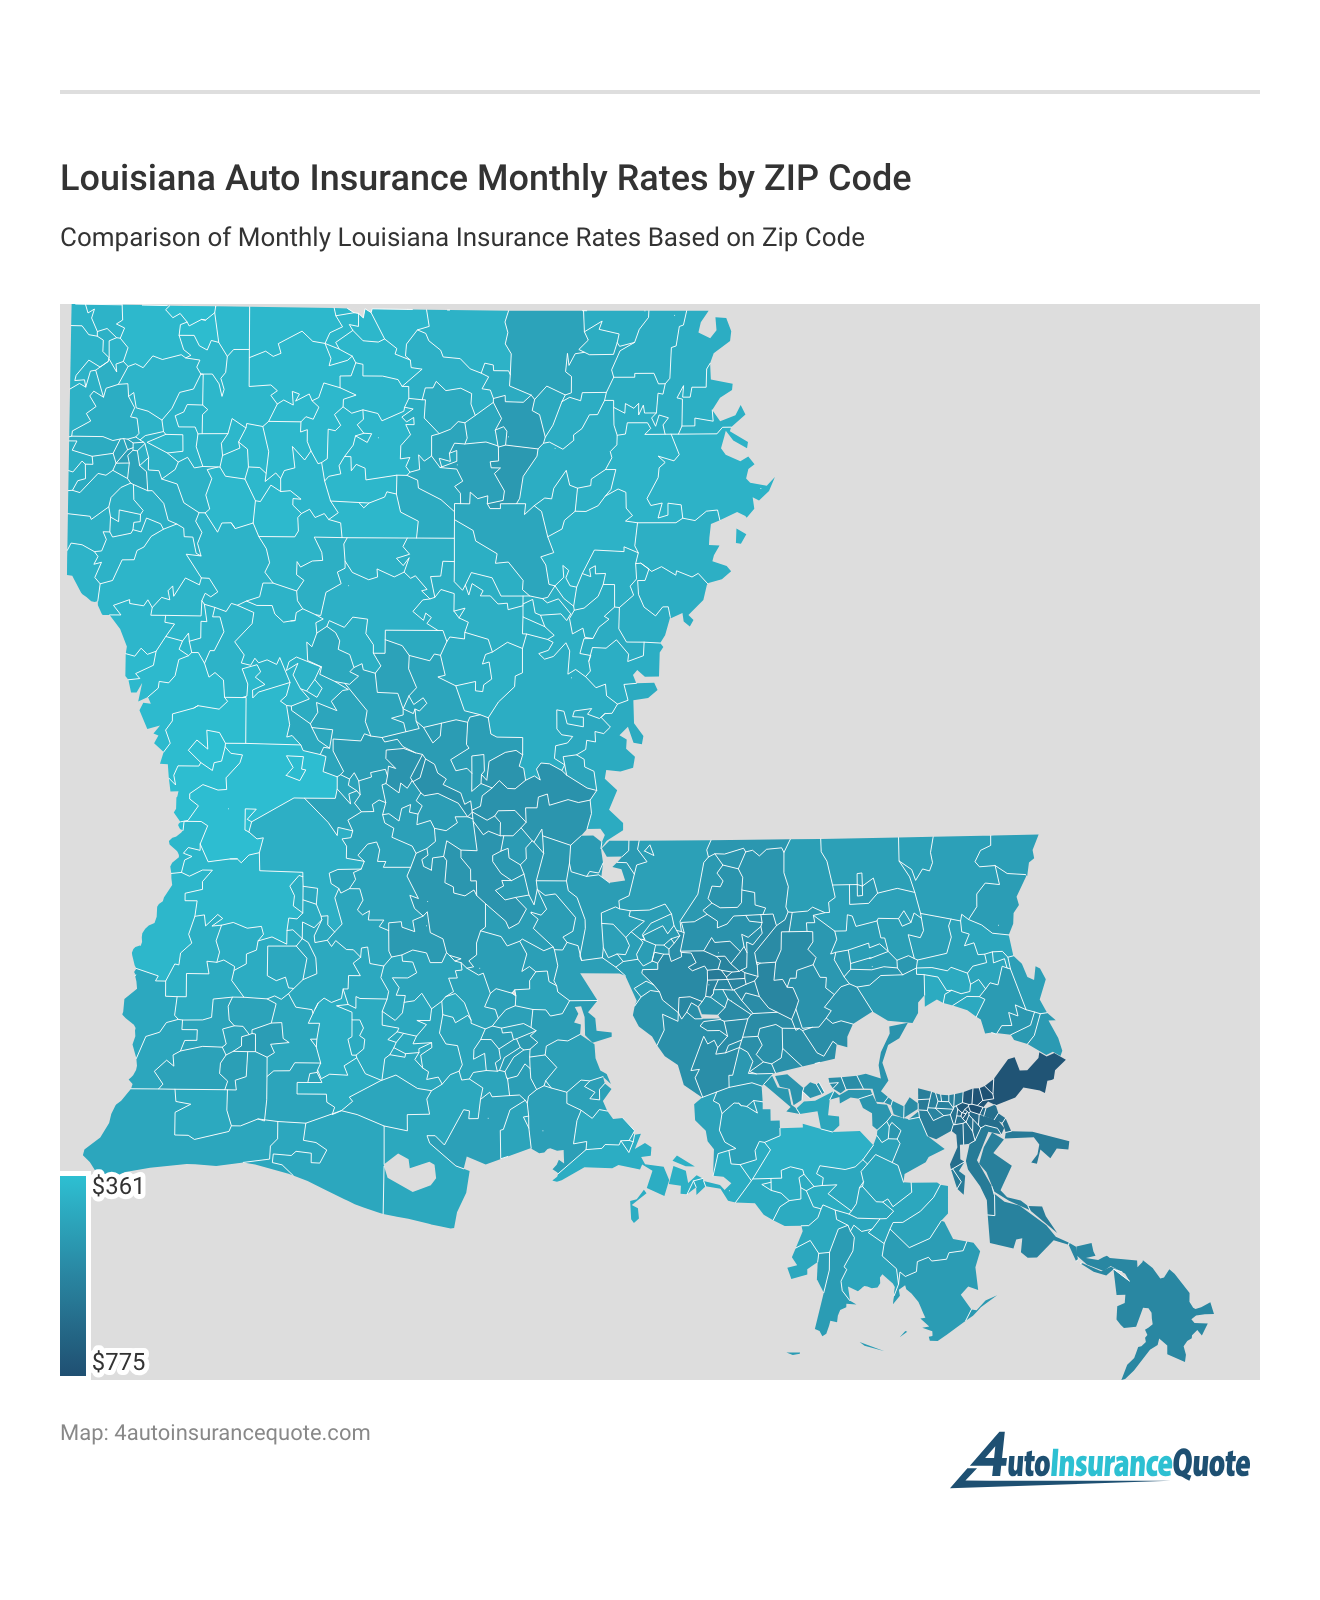 <h3>Louisiana Auto Insurance Monthly Rates by ZIP Code</h3>